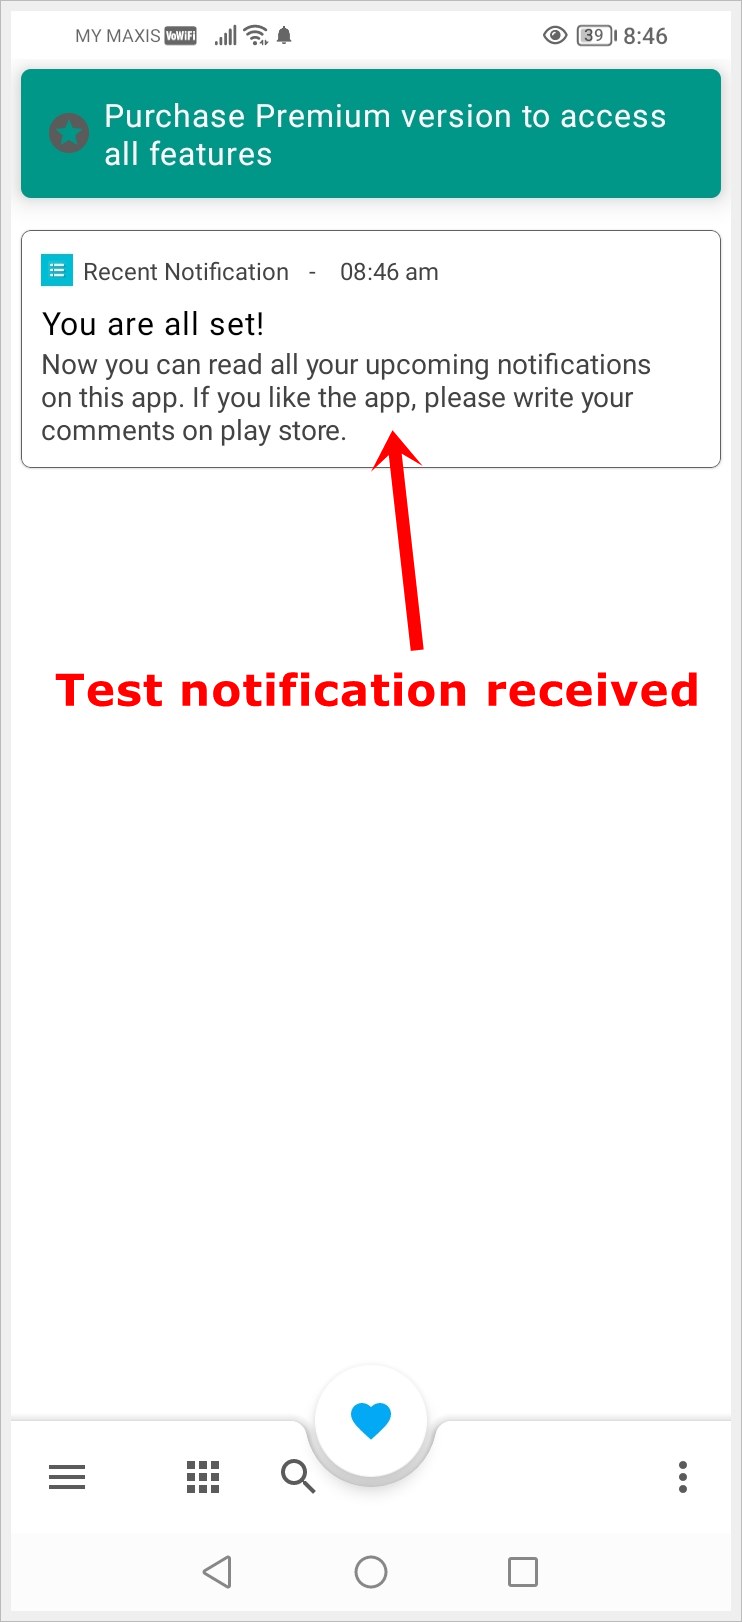 This image shows the 'Recent Notification' App's notification log. The test notification sent previously is highlighted.